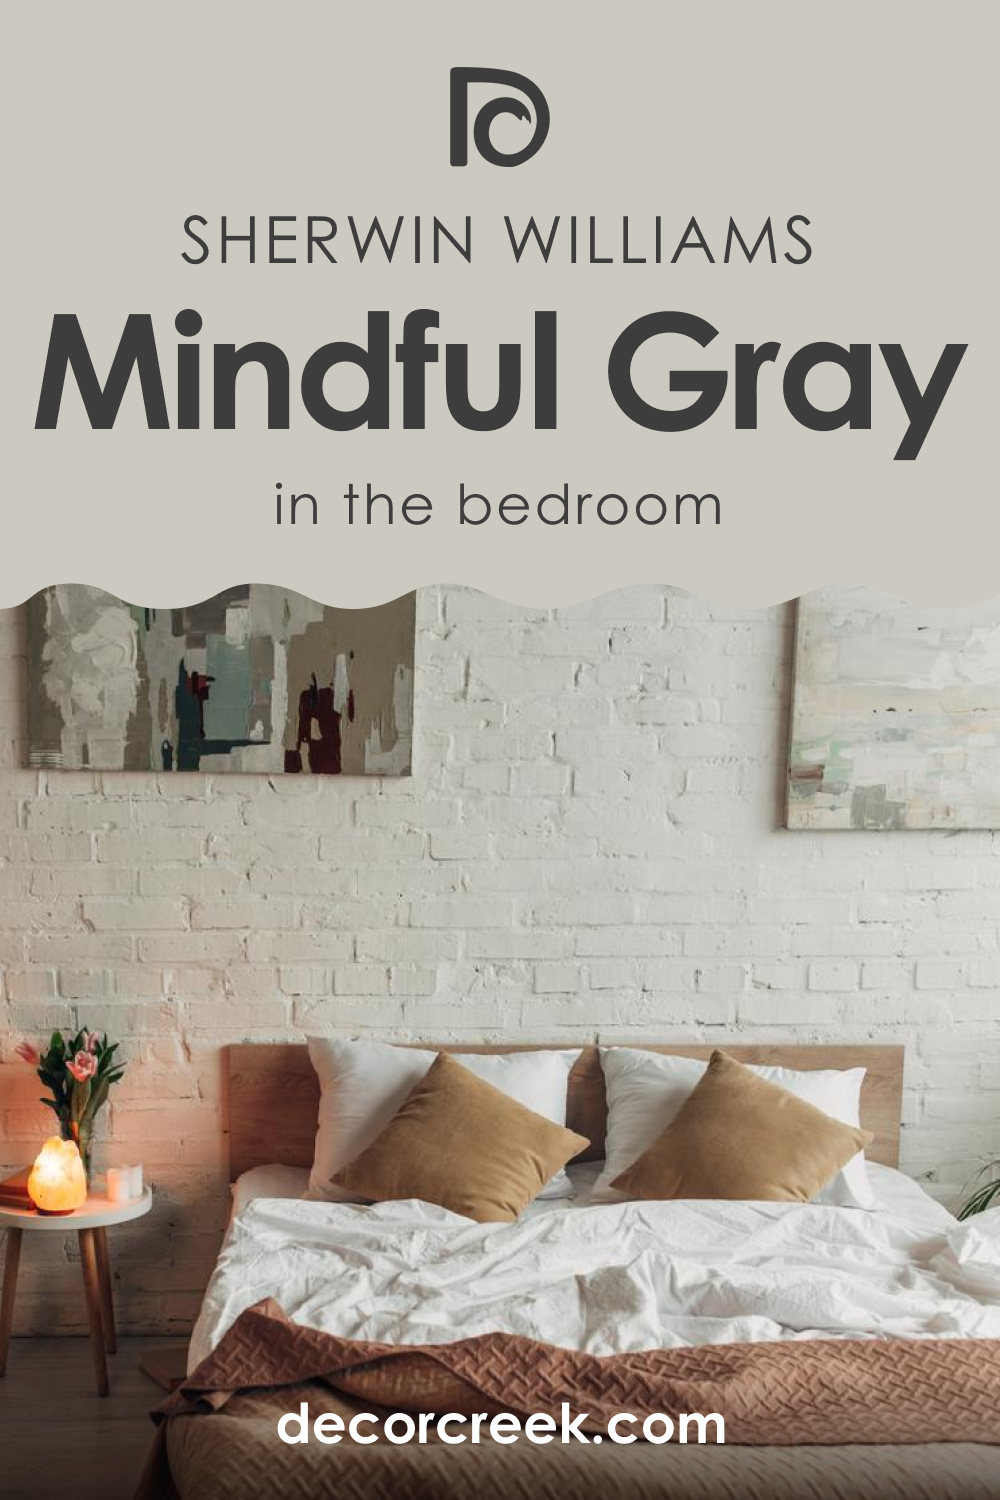 How to Use SW 7016 Mindful Gray in the Bedroom?